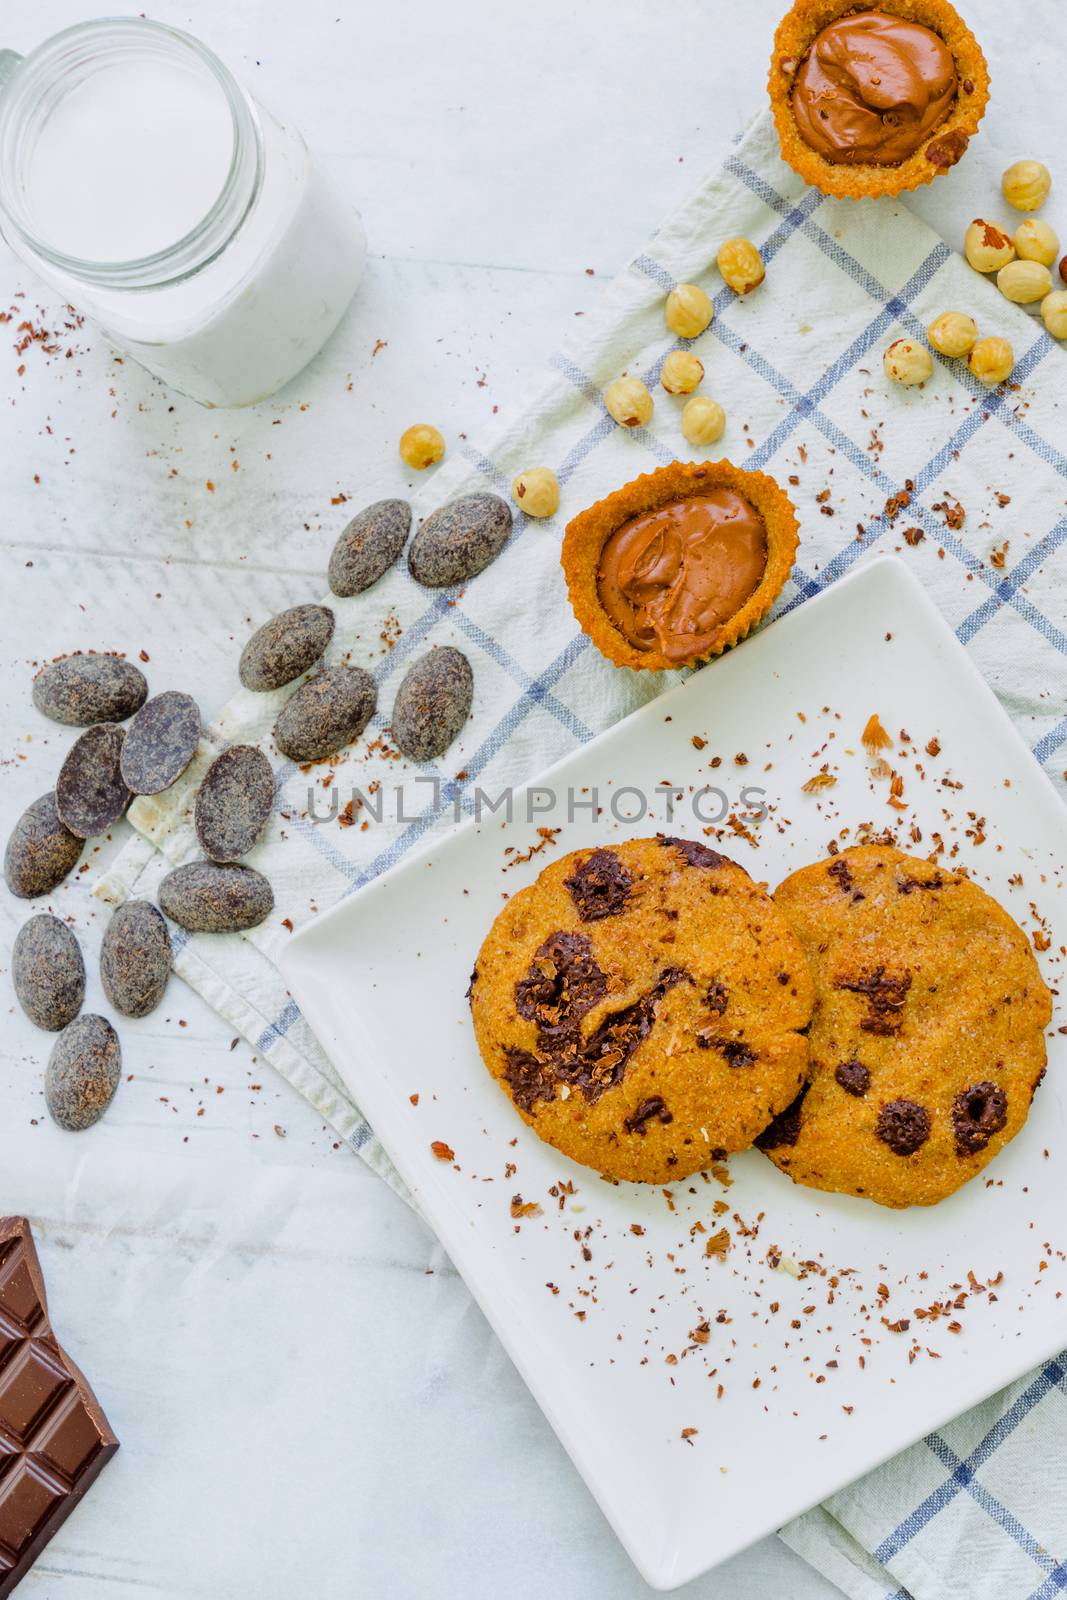 Organic chocolate chip cookies with hazelnuts, coconut milk and chocolate candies in a square plate on a wooden table